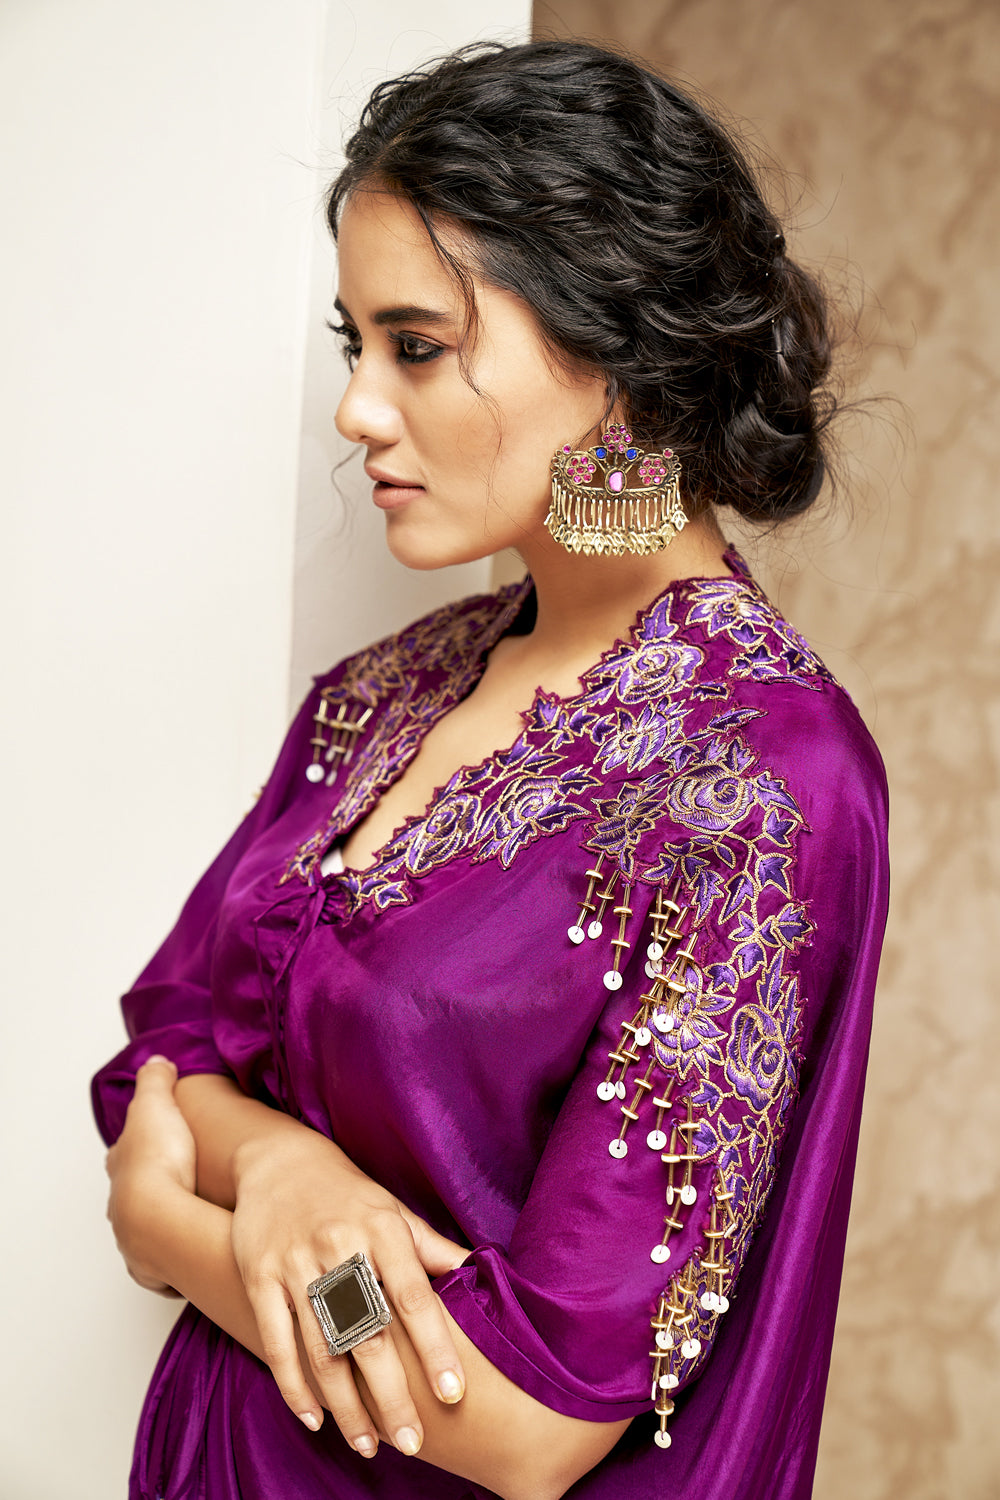 Embroidered Kaftan with Center Front Drawstring